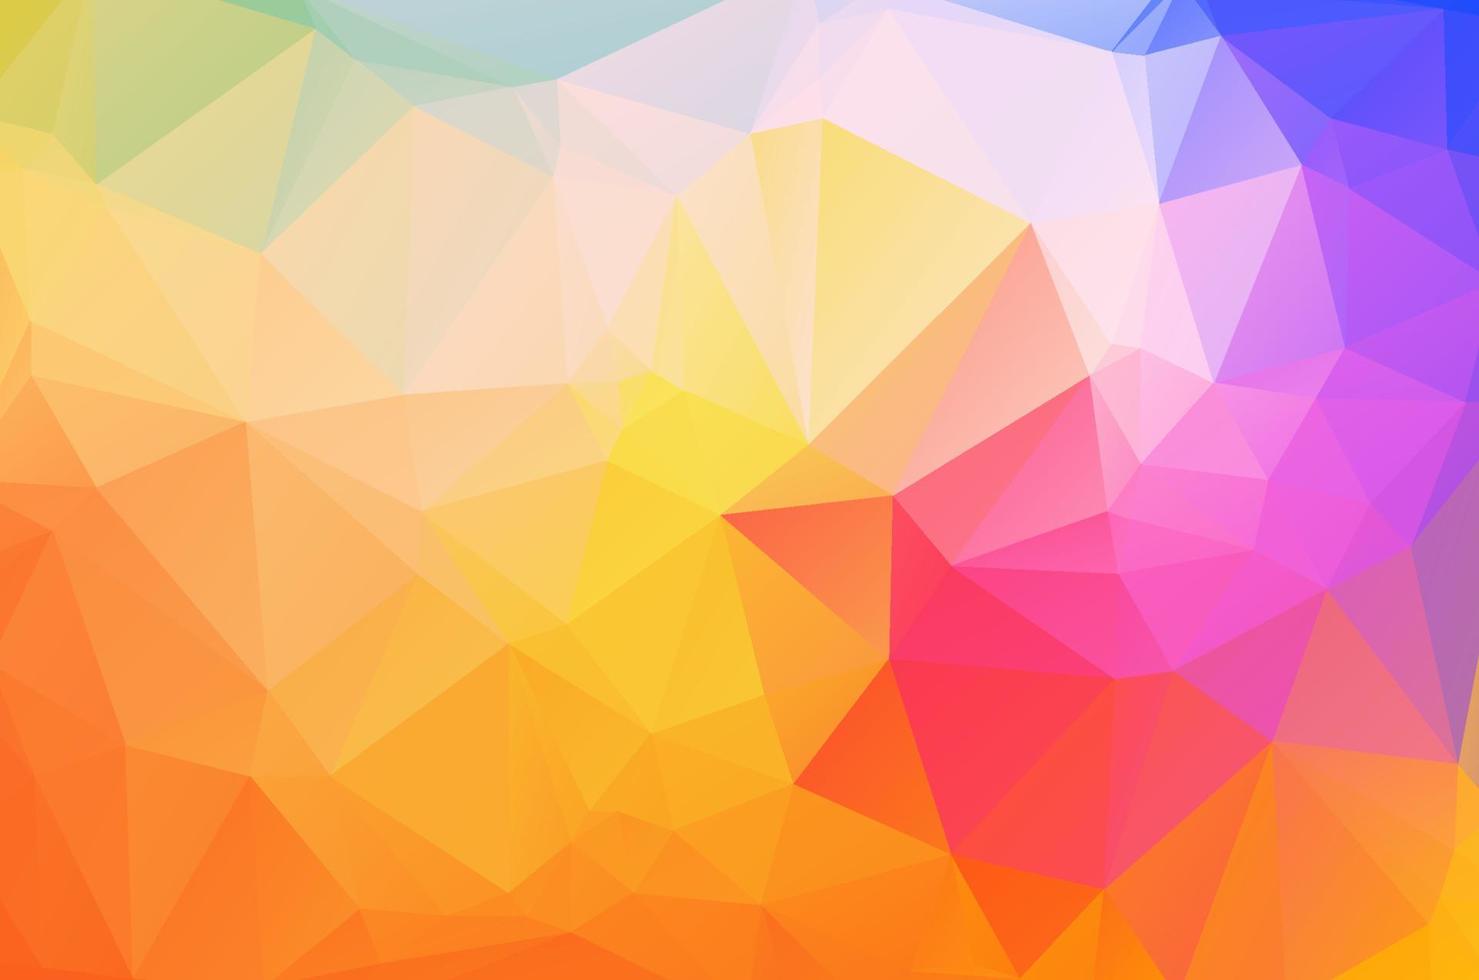 Abstract blue color low poly crystal background. Polygon design